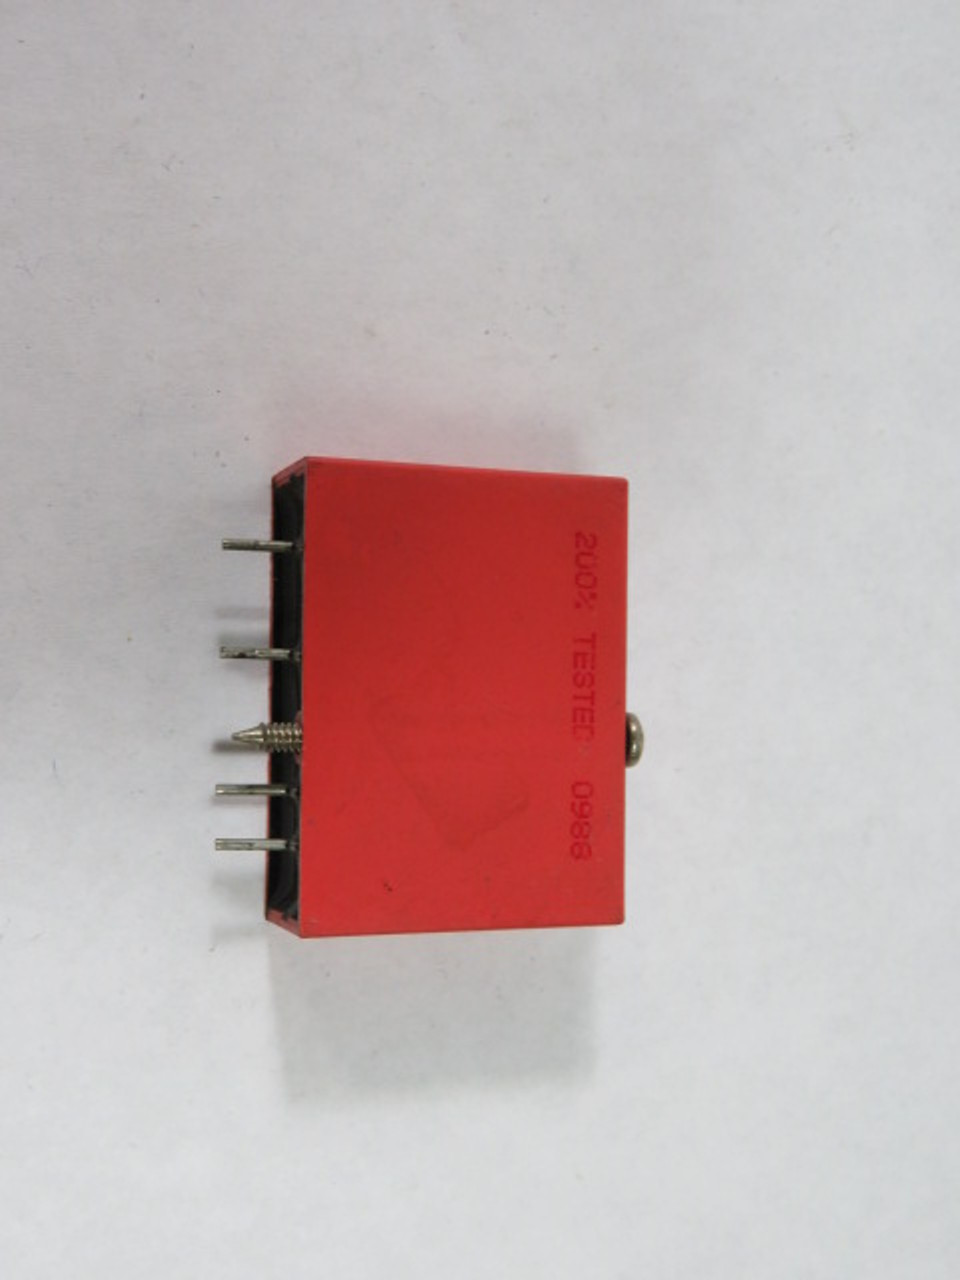 Opto22 ODC-5 Output Module 3A 5-60VDC USED